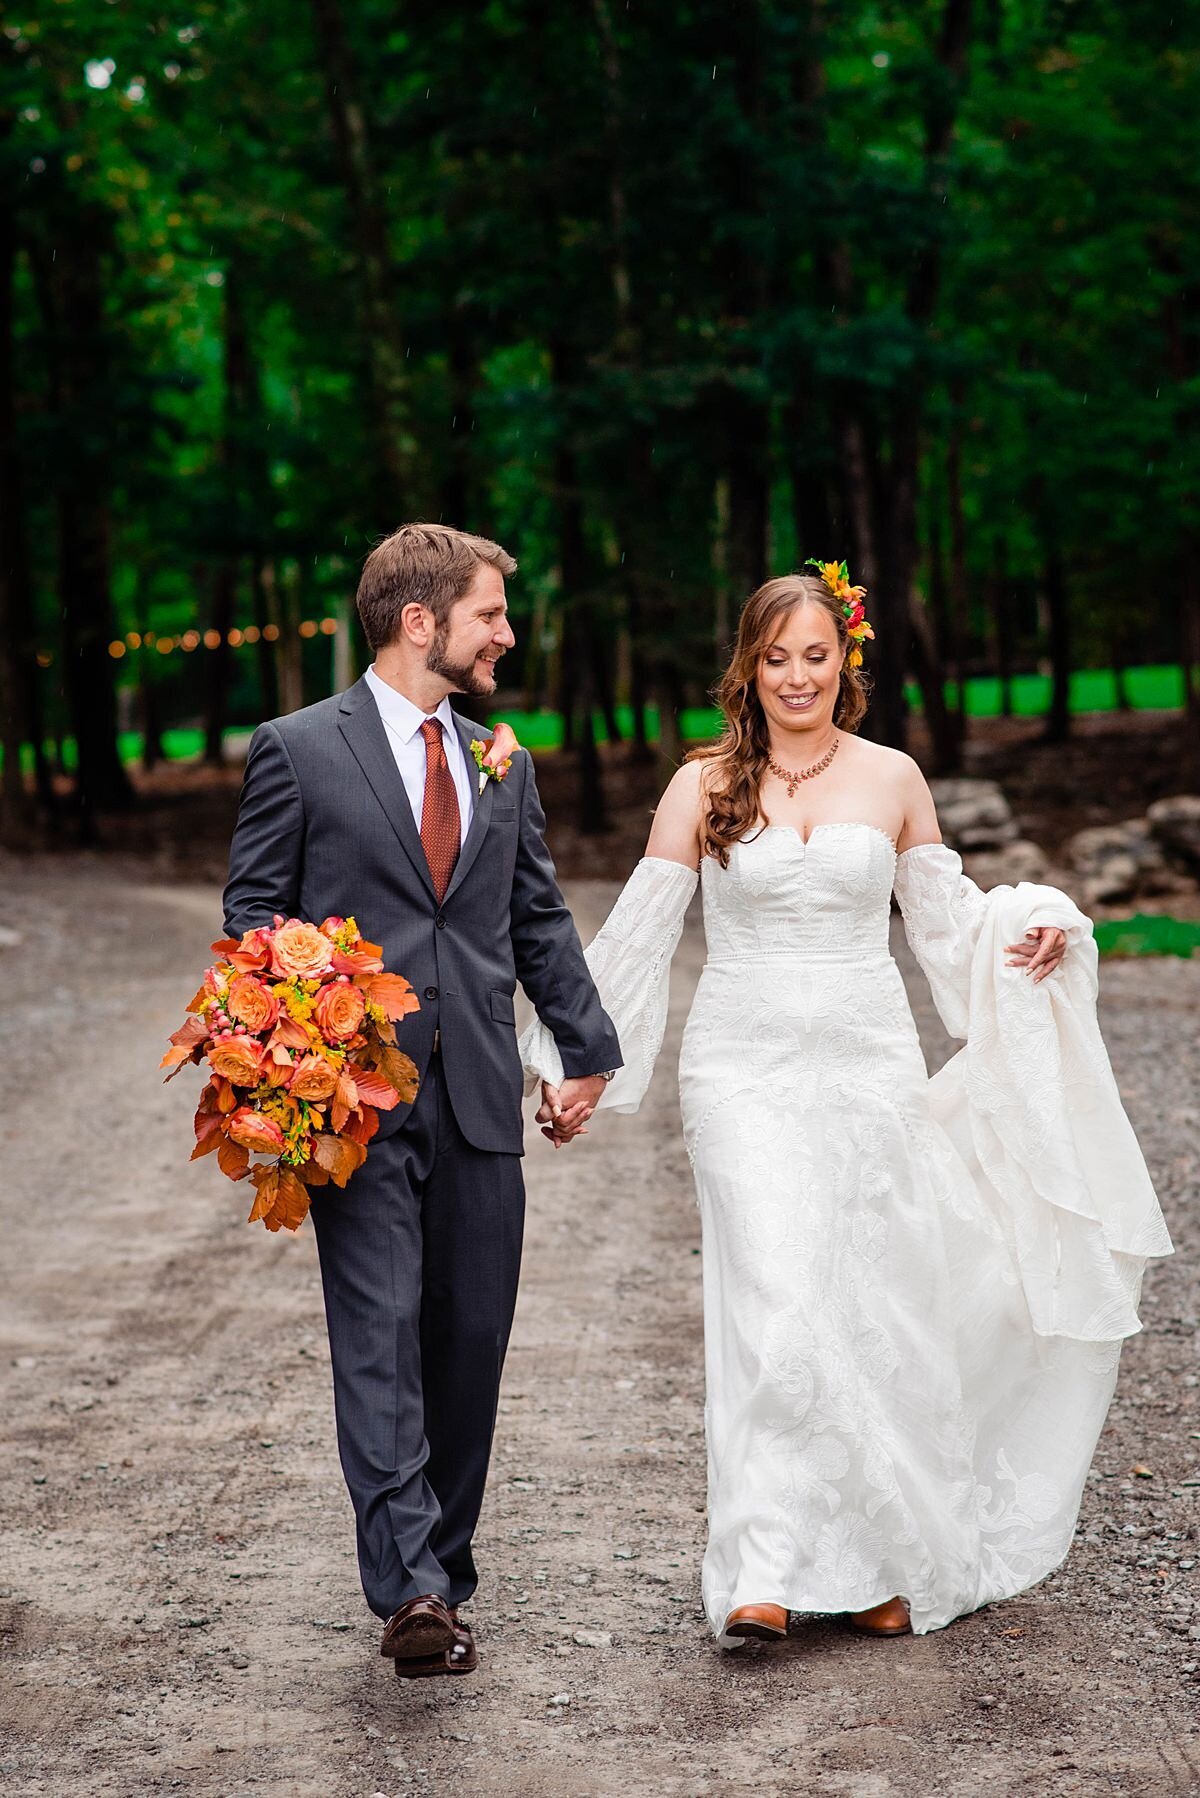 The groom, dressed in a charcoal gray suit, leads the bride, who is dressed in a detachable sleeve boho wedding dress, by the hand while carrying her bouquet of autumn leaves.